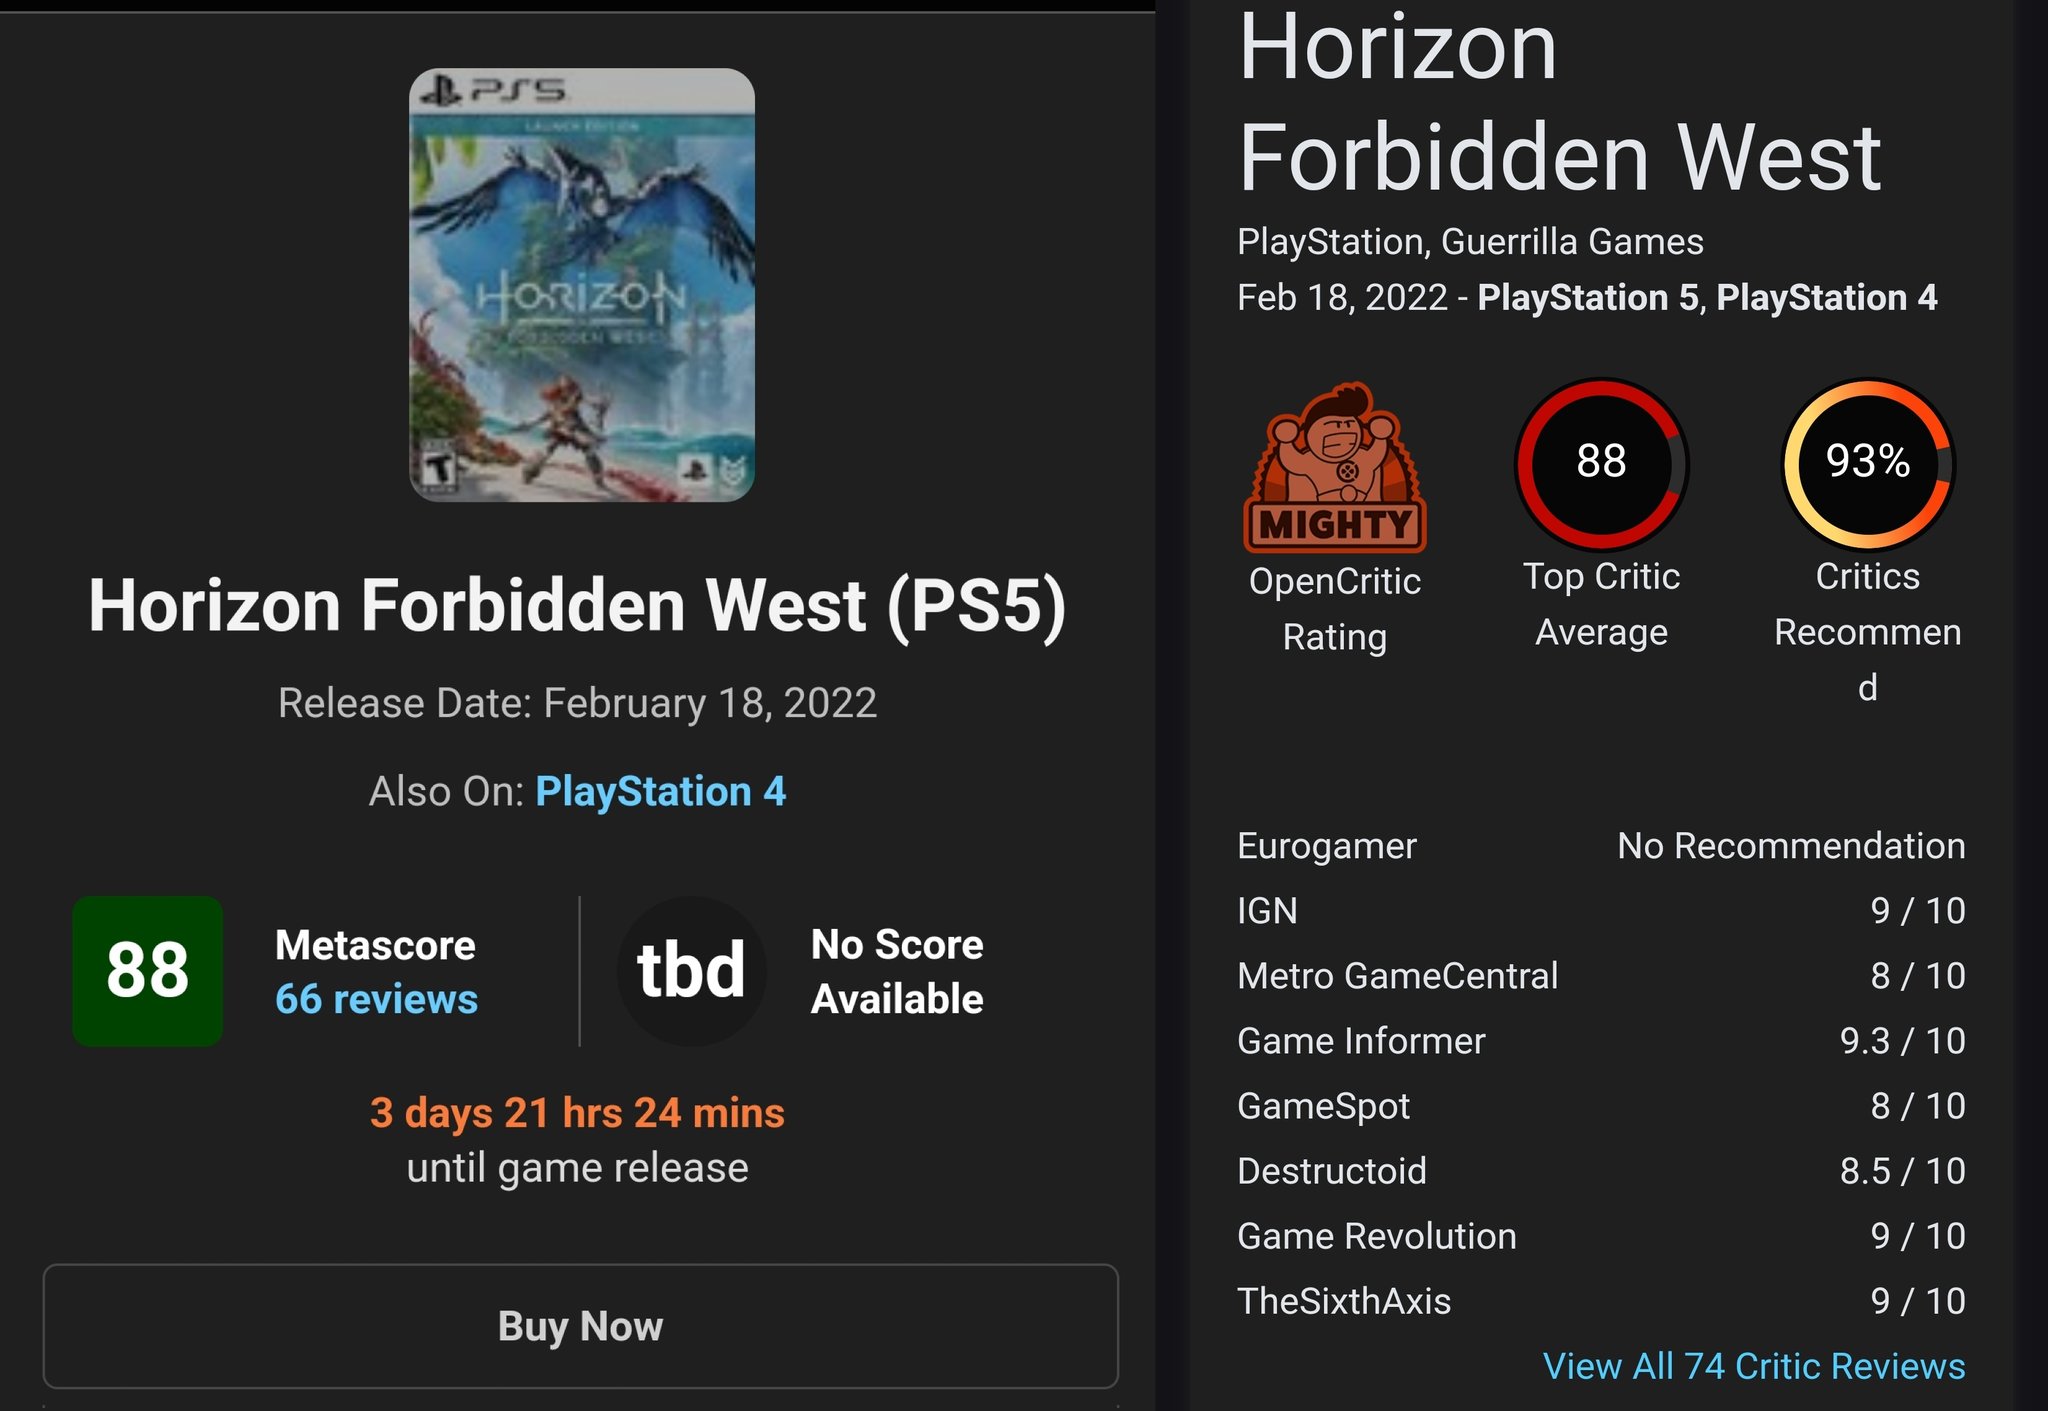 Benji-Sales on X: Overall great scores for Horizon Forbidden West.  Currently sitting at 88 on both Metacritic (66 Reviews) and Opencritic (74  Reviews) Absolutely loved Zero Dawn and can't wait to experience